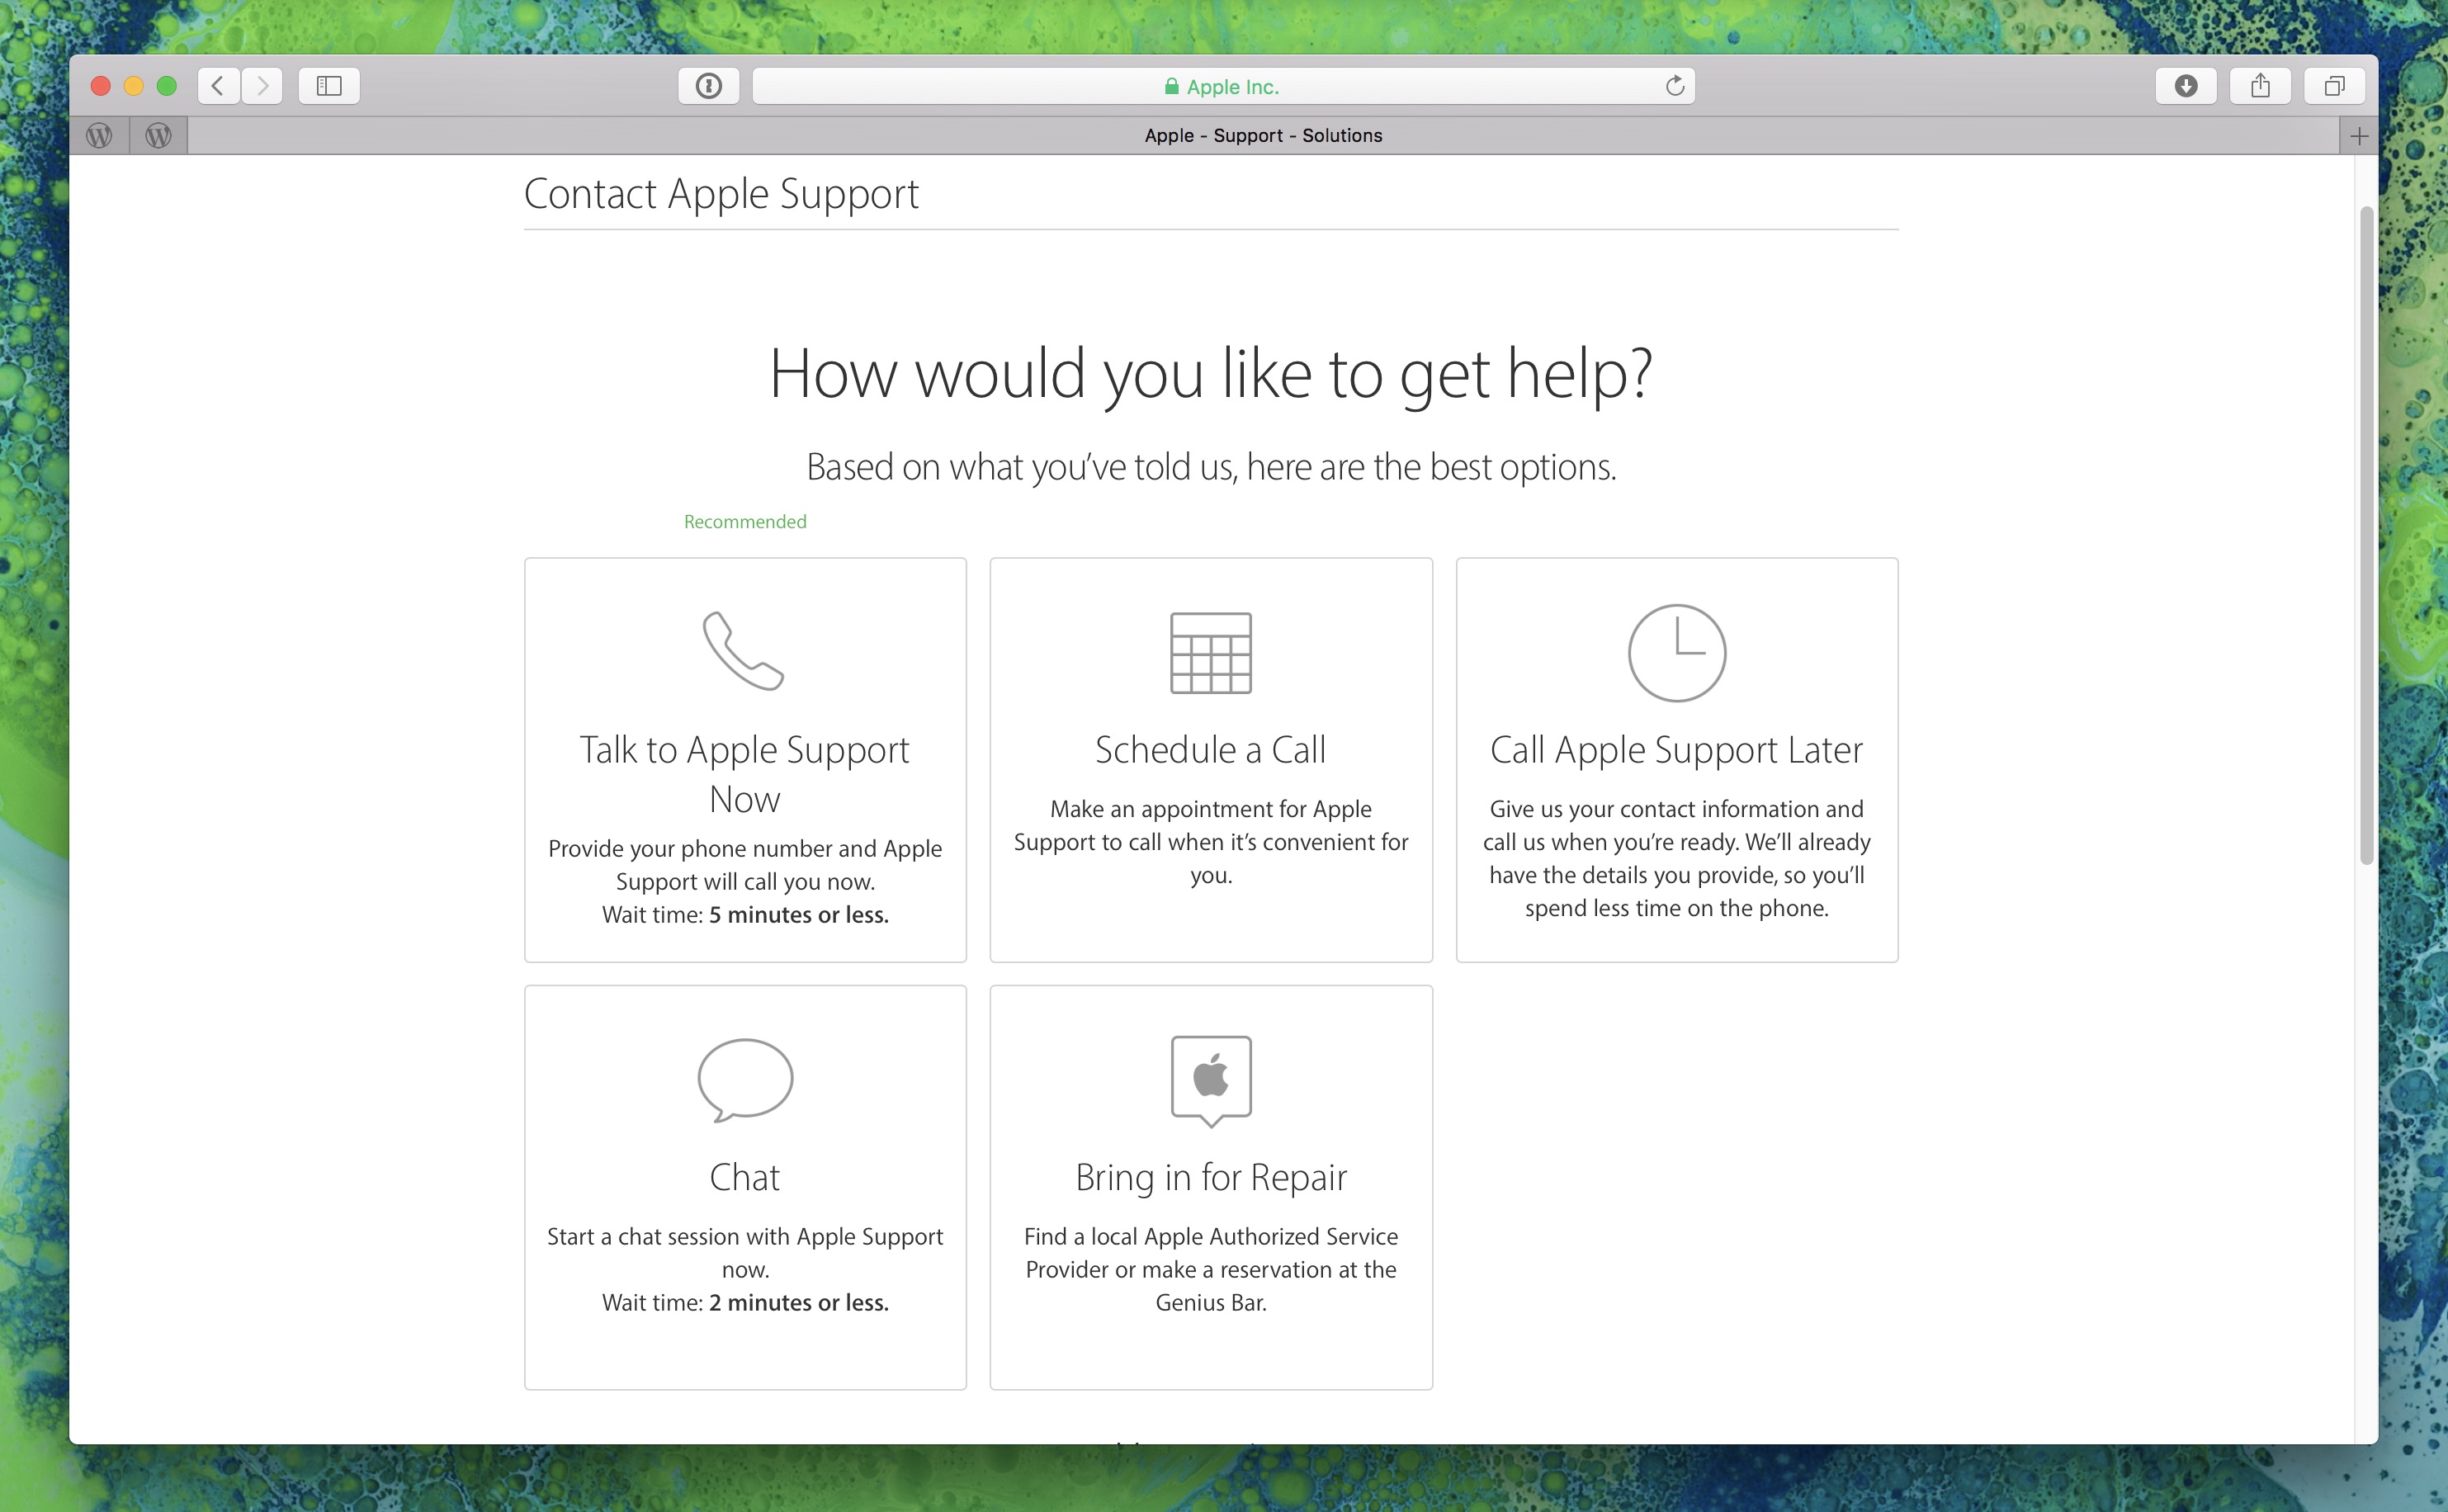 Image showing Apple support options on getsupport.apple.com